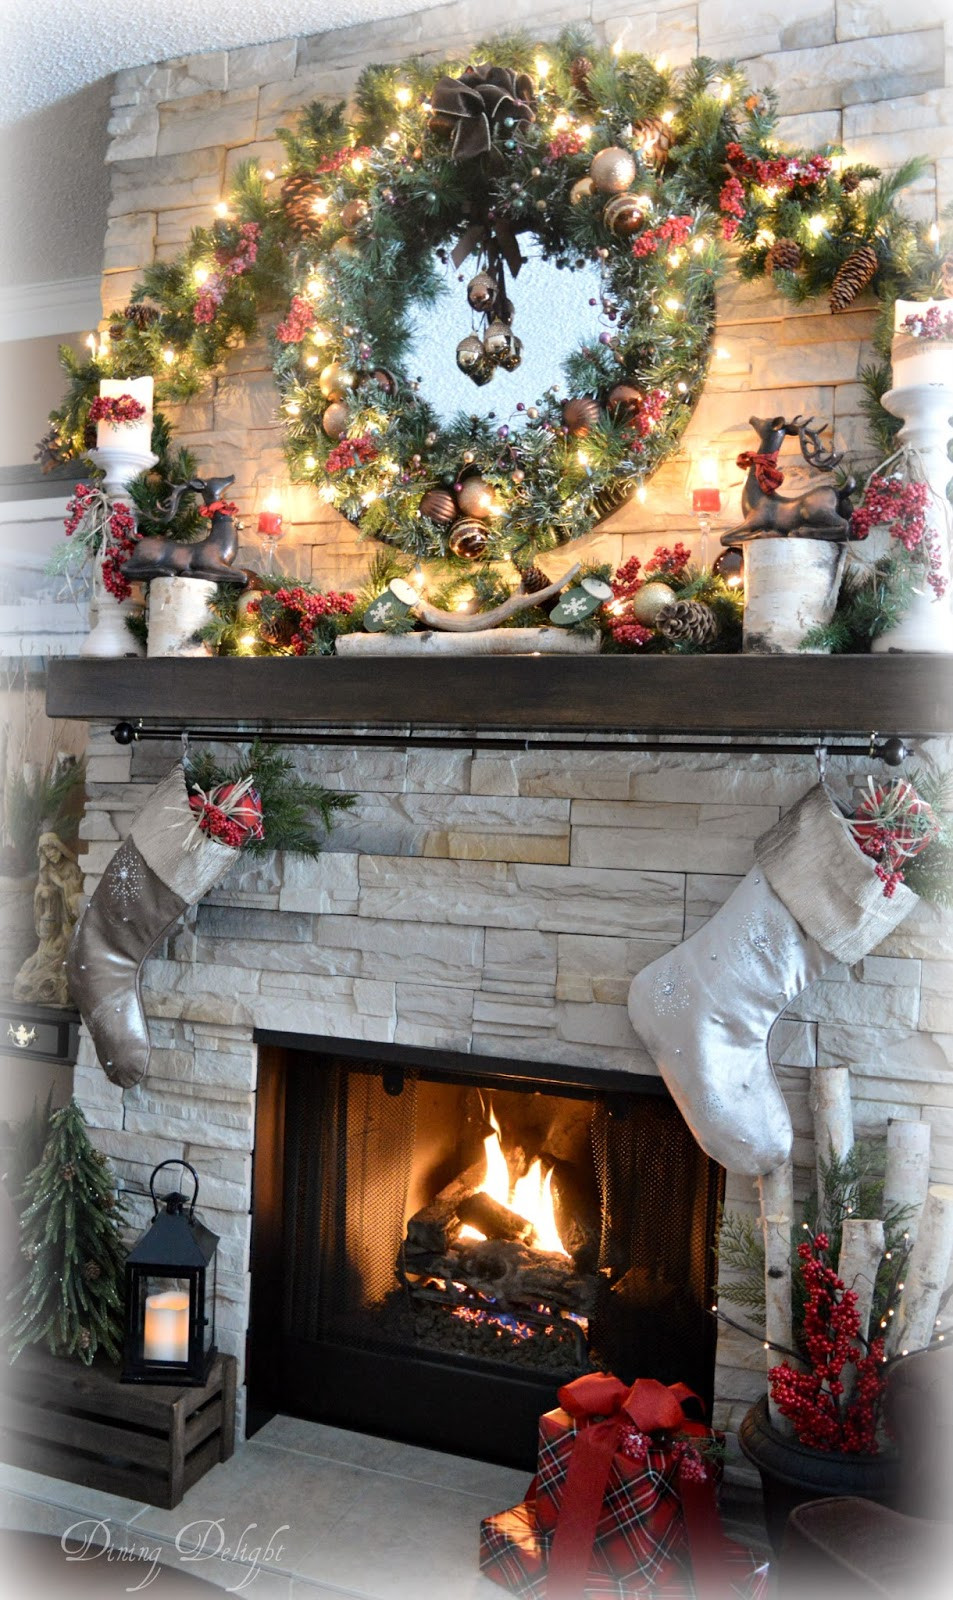 Cozy Christmas Fireplace
 Dining Delight Holiday Home Tour Christmas in a Cozy House